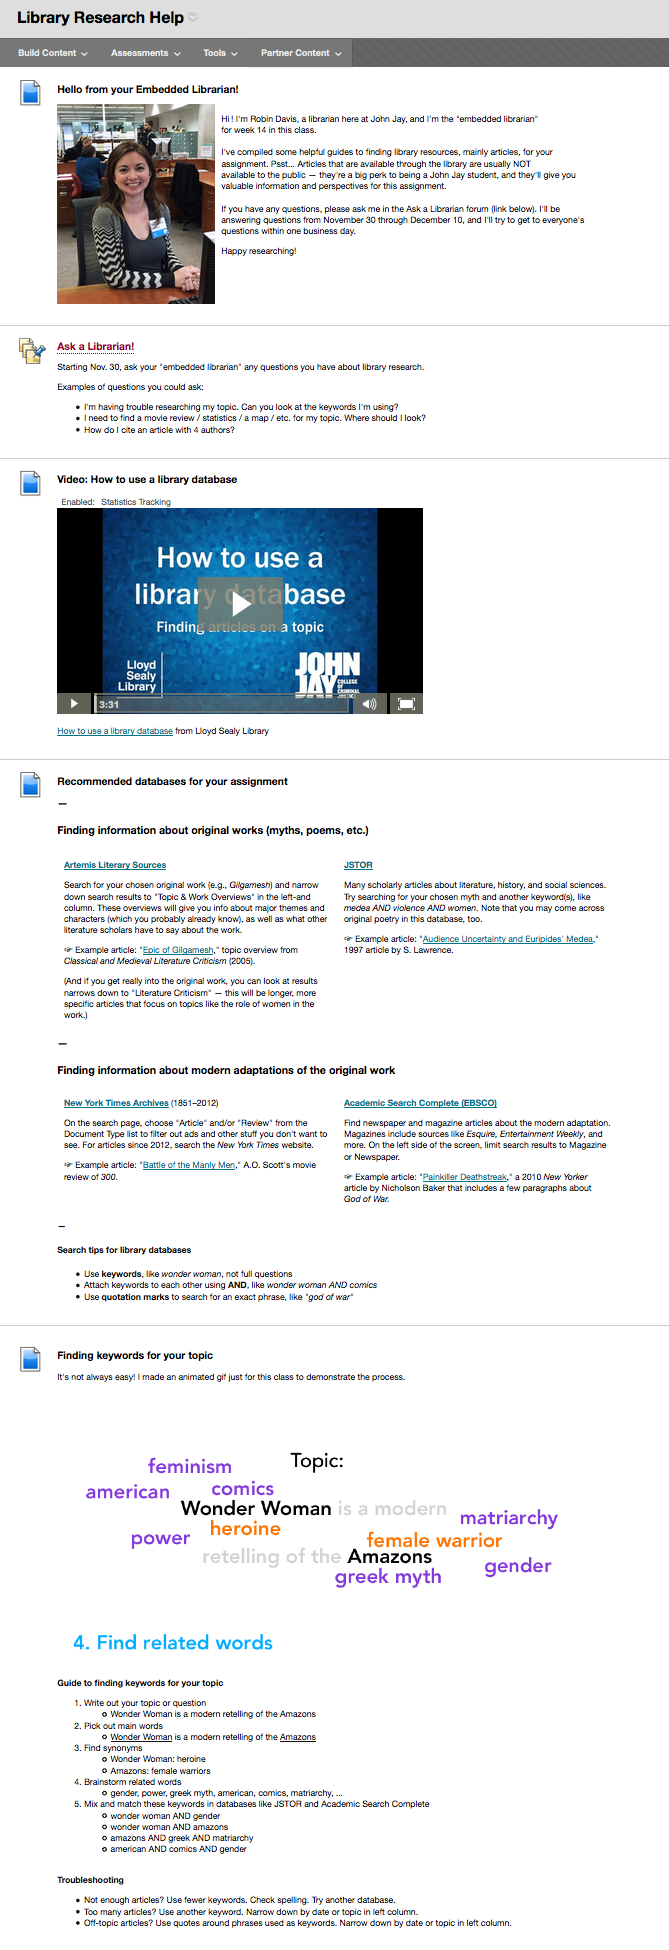 Example of content posted in a Blackboard course by a librarian: tutorial video, recommended databases, animated gif about keywords, citation information